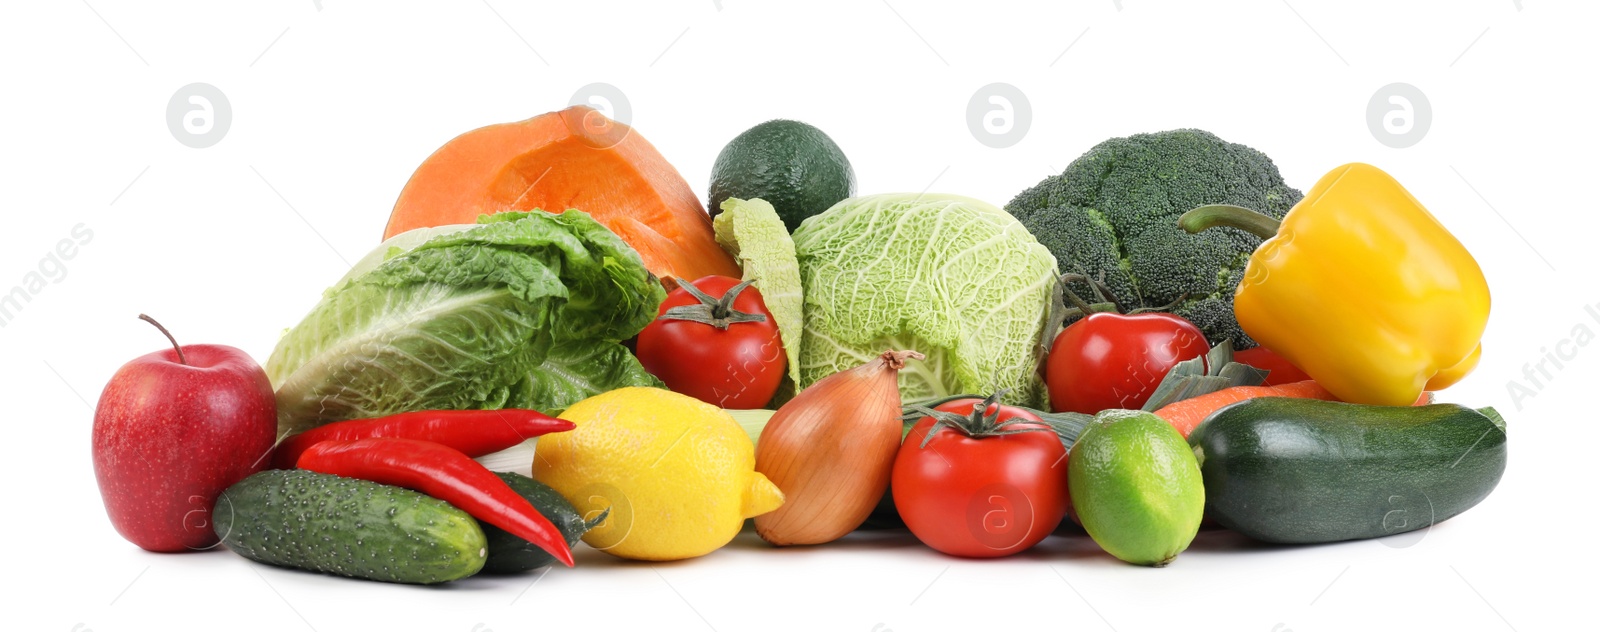 Photo of Pile of fresh ripe vegetables and fruits on white background